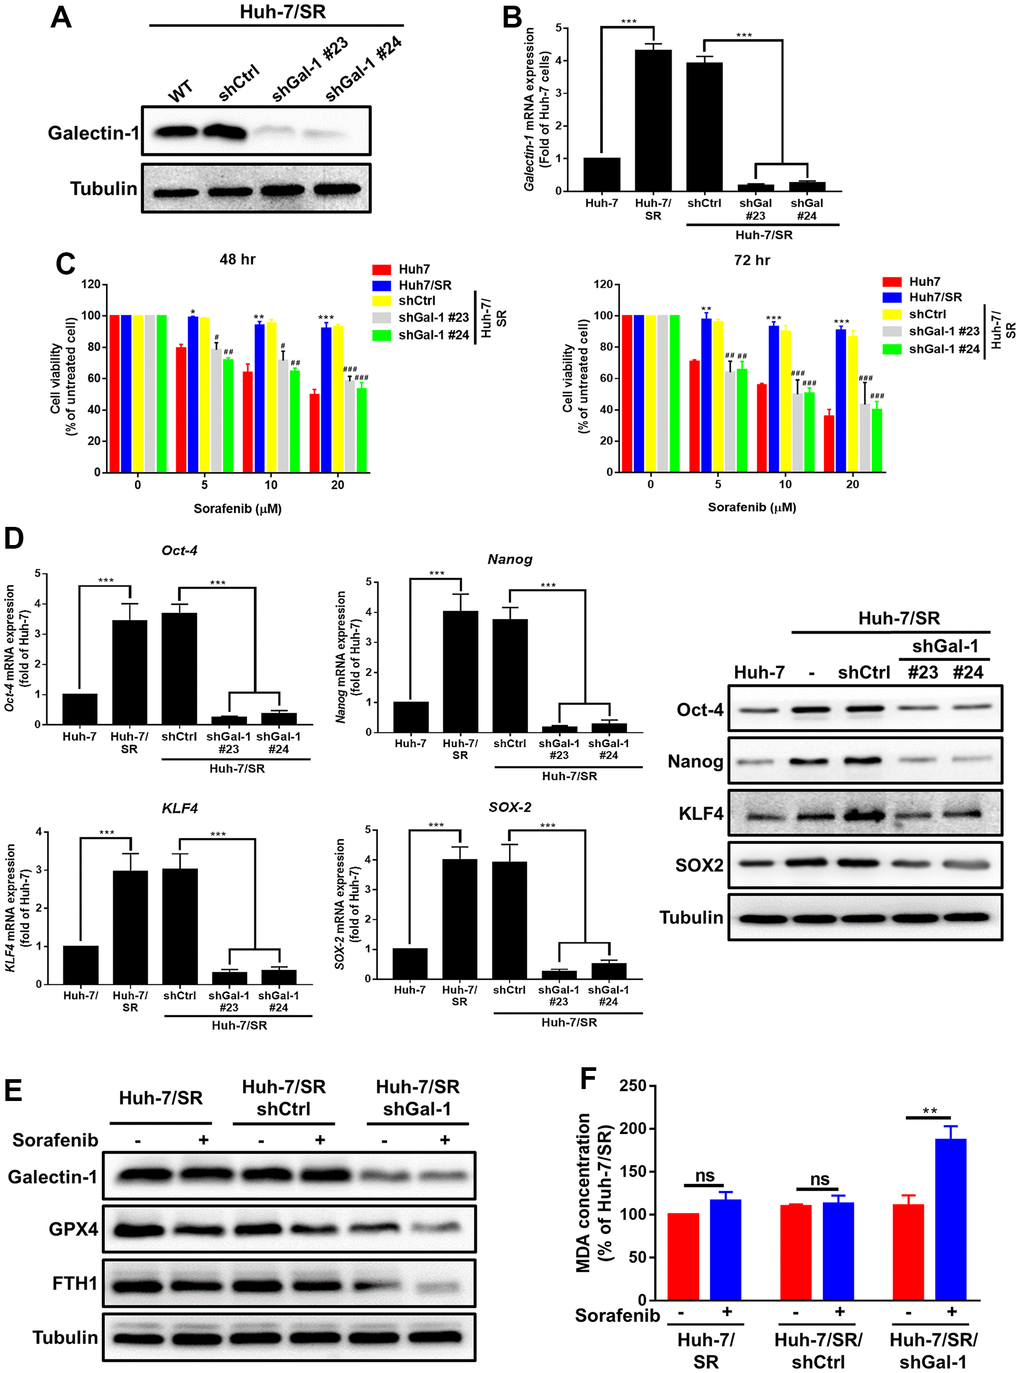 Loss of Galectin-1 overcomes sorafenib sensitivity and promotes ferroptosis in HCC cells. (A, B) Stable Galectin-1-silenced Huh-7/SR (Huh-7/SR/shGal#23 and #24) and control (Huh-7/SR/shCtrl) cells were analyzed using Western blotting and qRT-PCR. (C) Sorafenib sensitivity in indicated cells analyzed for 48 and 72 h by using the MTT assay. (D) qRT-PCR and Western blotting were used to determine the expression of cancer stem cells markers (Oct-4, Nanog, SOX-2, and KLF4). (E) Western blotting analysis of Galectin-1, GPX4, and FTH-1 expression in Galectin-1-knockdown sorafenib-resistant HCC cells, cells treated with sorafenib (10 μM) for 48 h, and cells not treated with sorafenib, respectively. (F) Lipid peroxidation determined using the MDA assay. Data are presented as means ± standard deviations. *P P P P P t test).